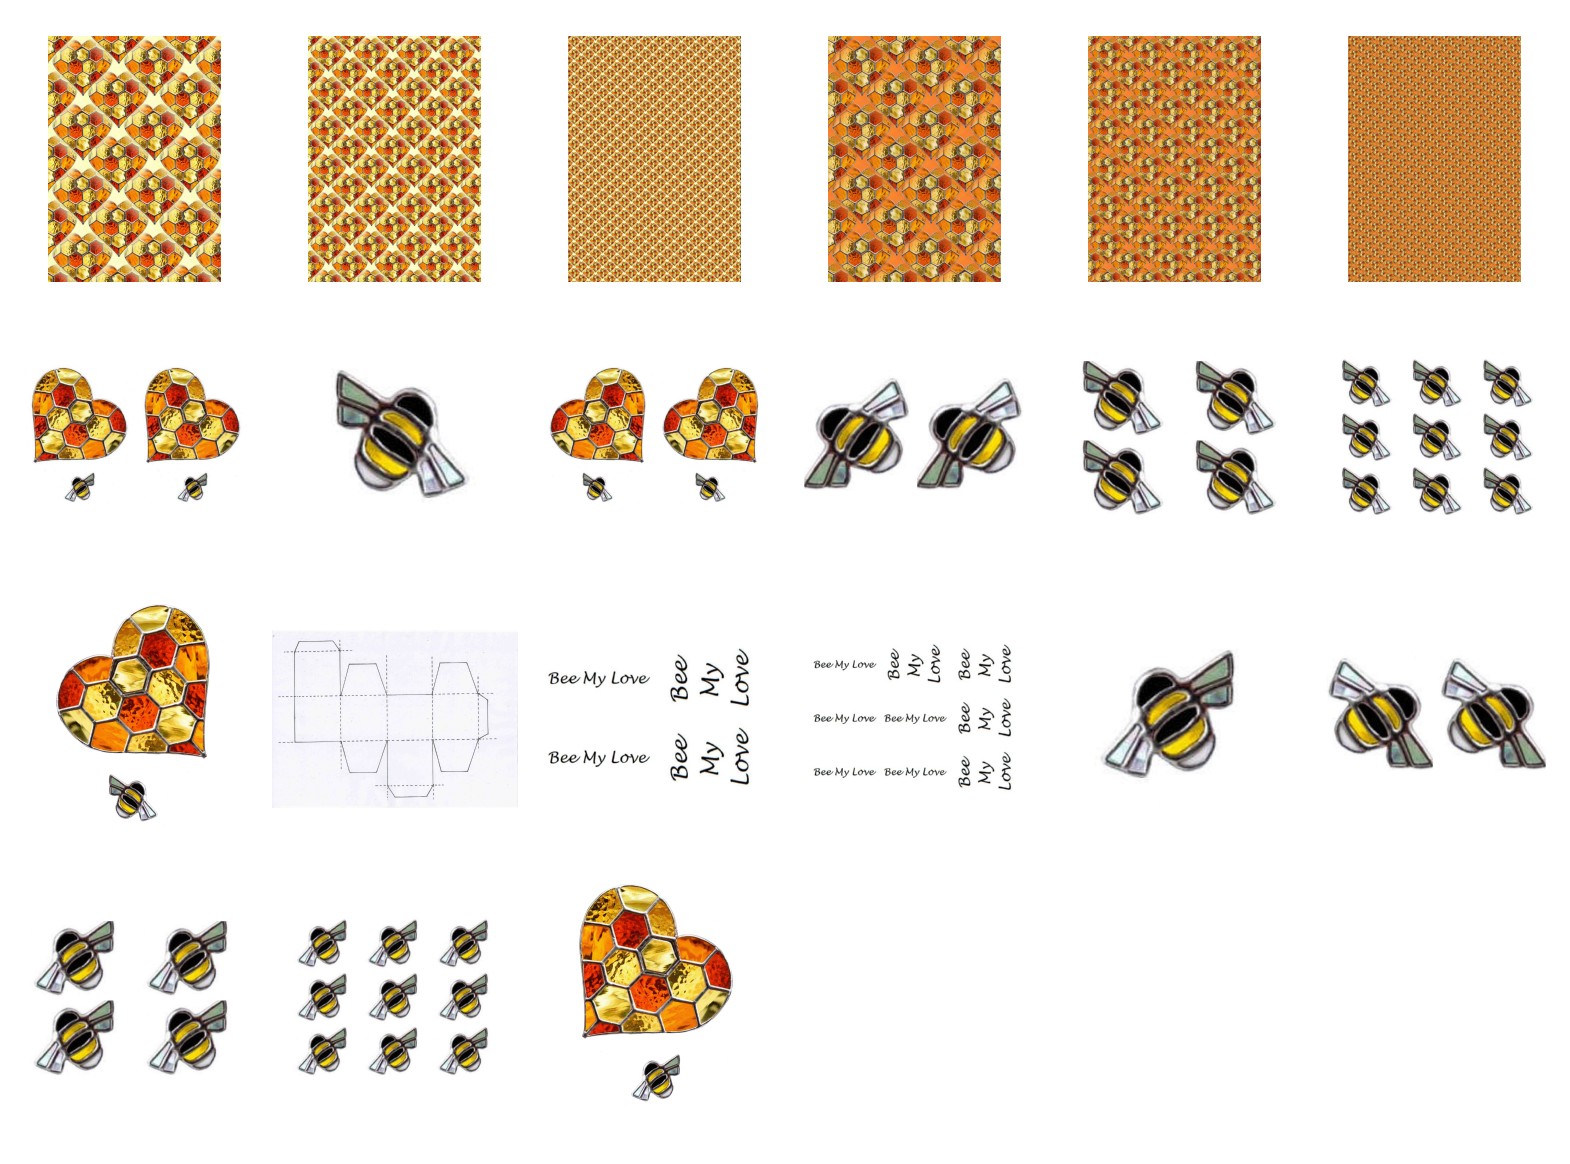 Honeycomb Heart and Bees - Click DOWNLOAD below and enter FREE@FREE.com